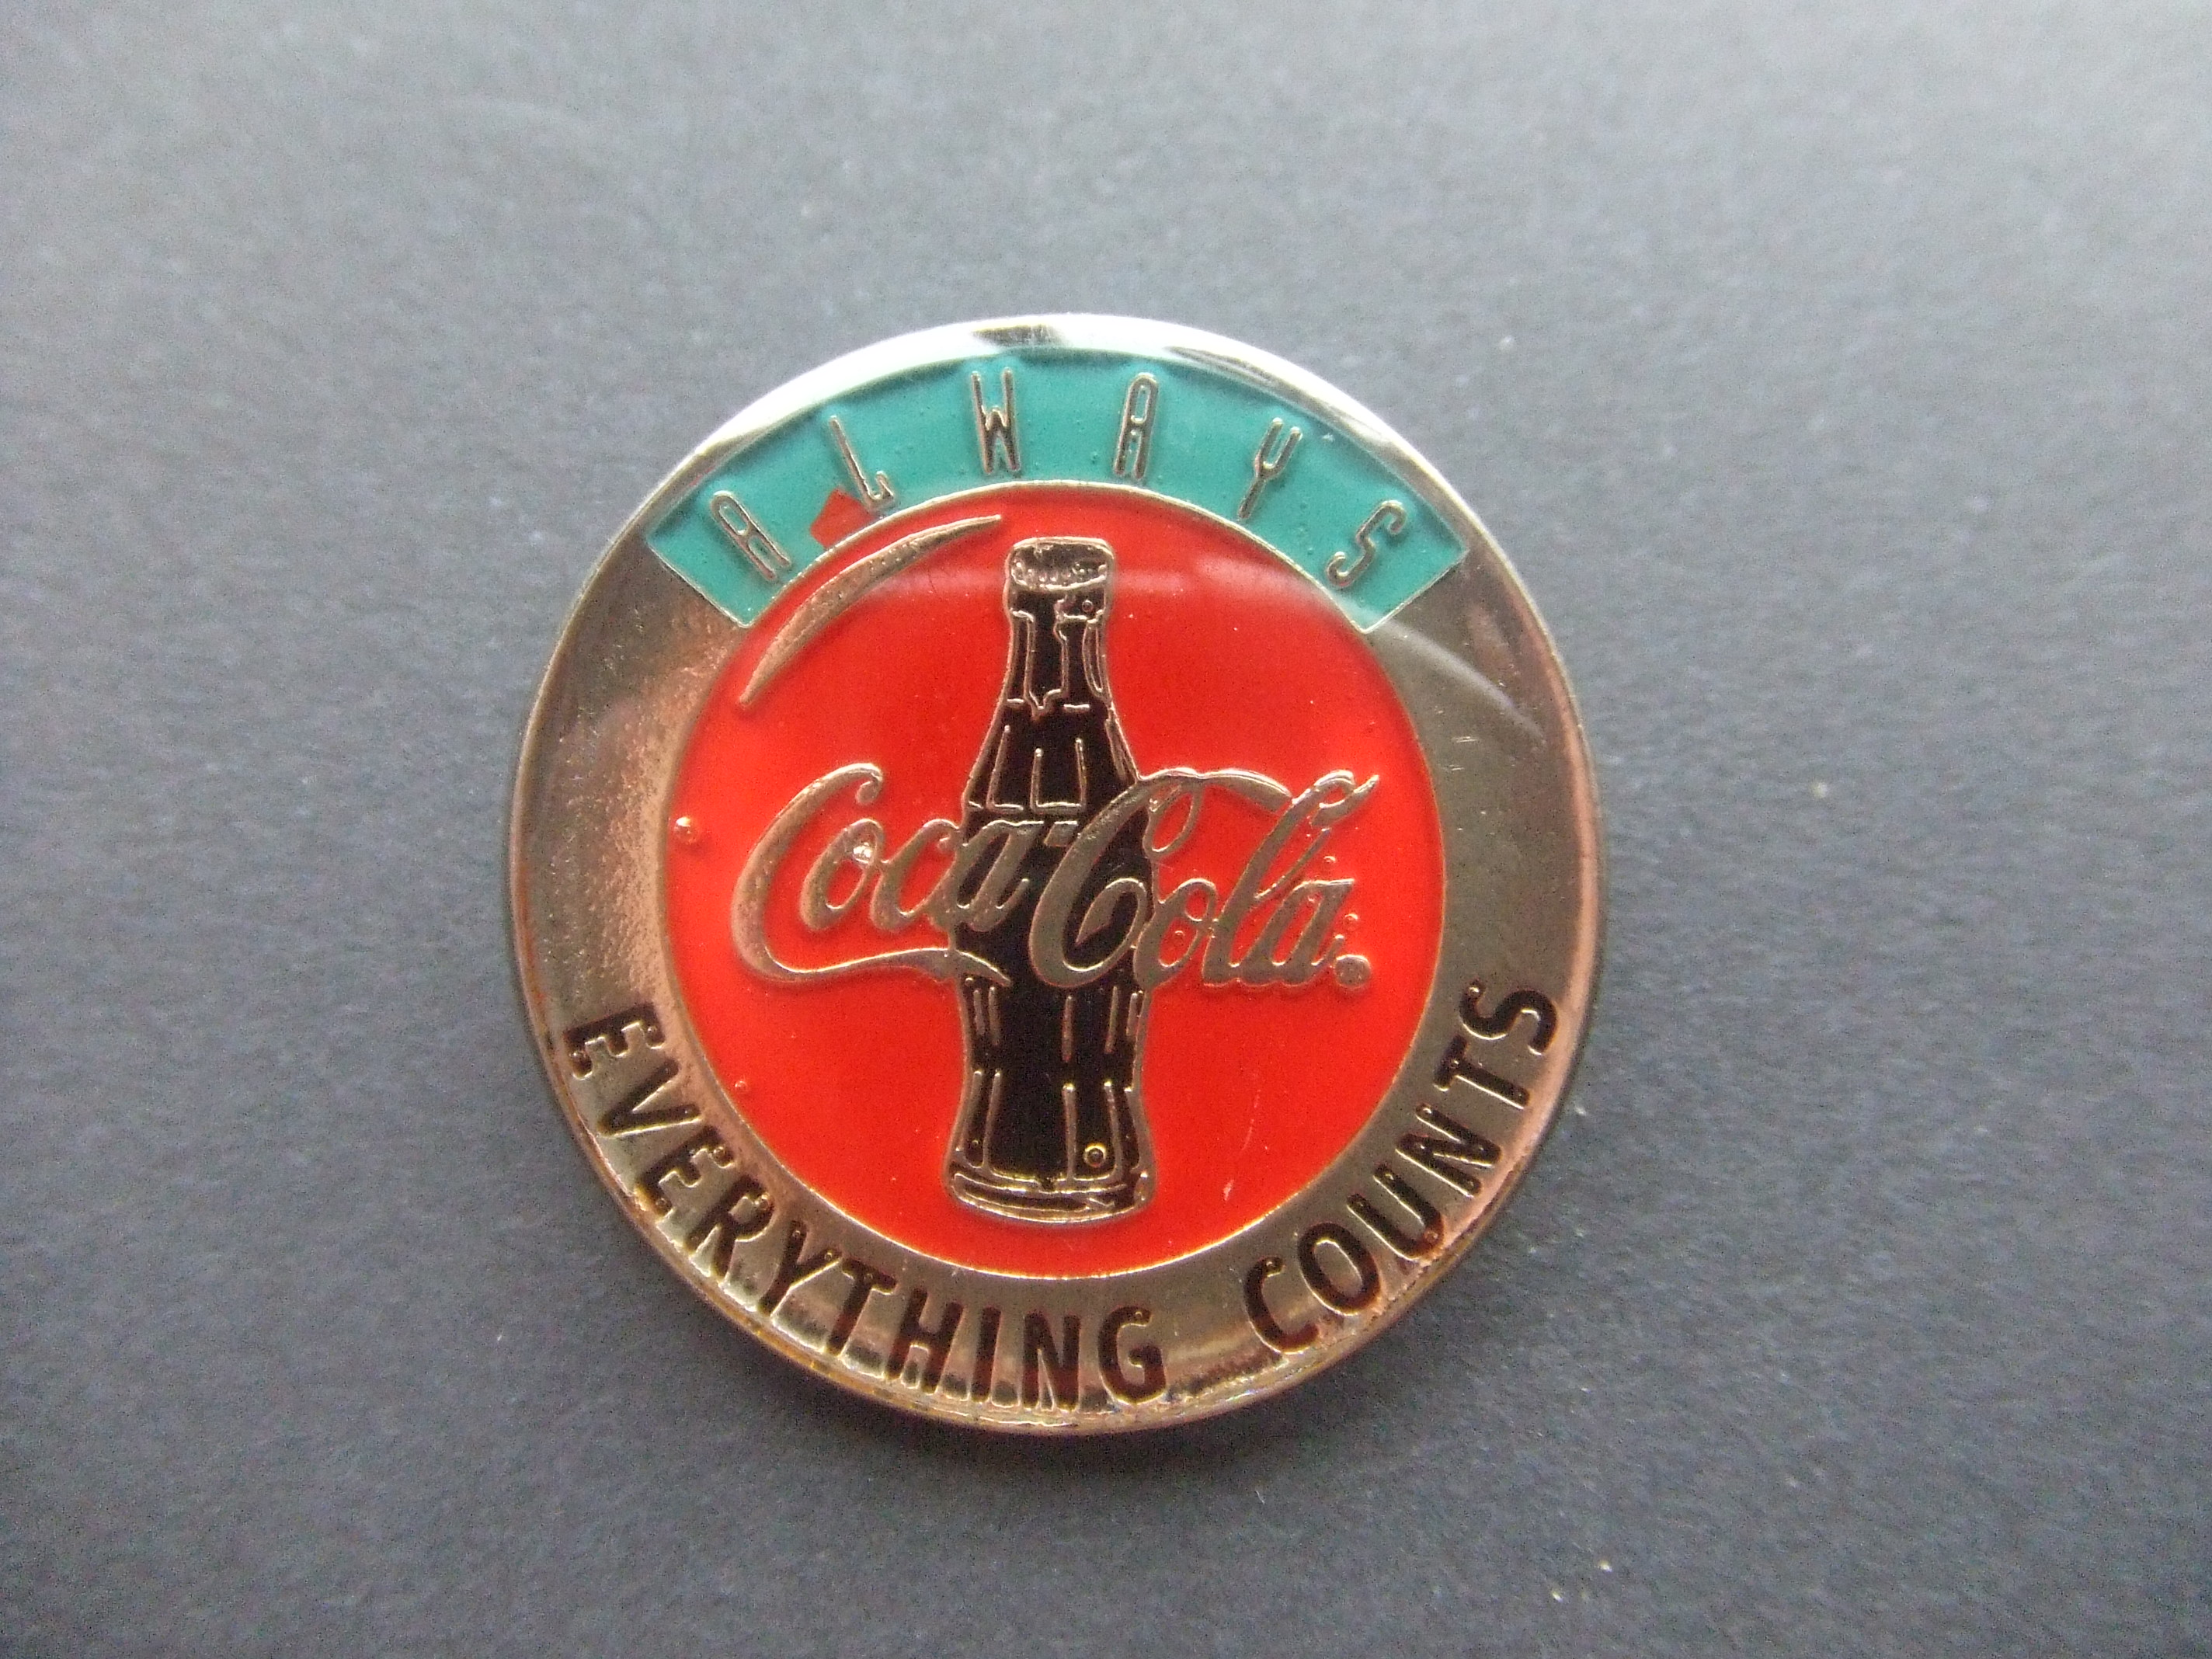 Coca Cola Everything Counts